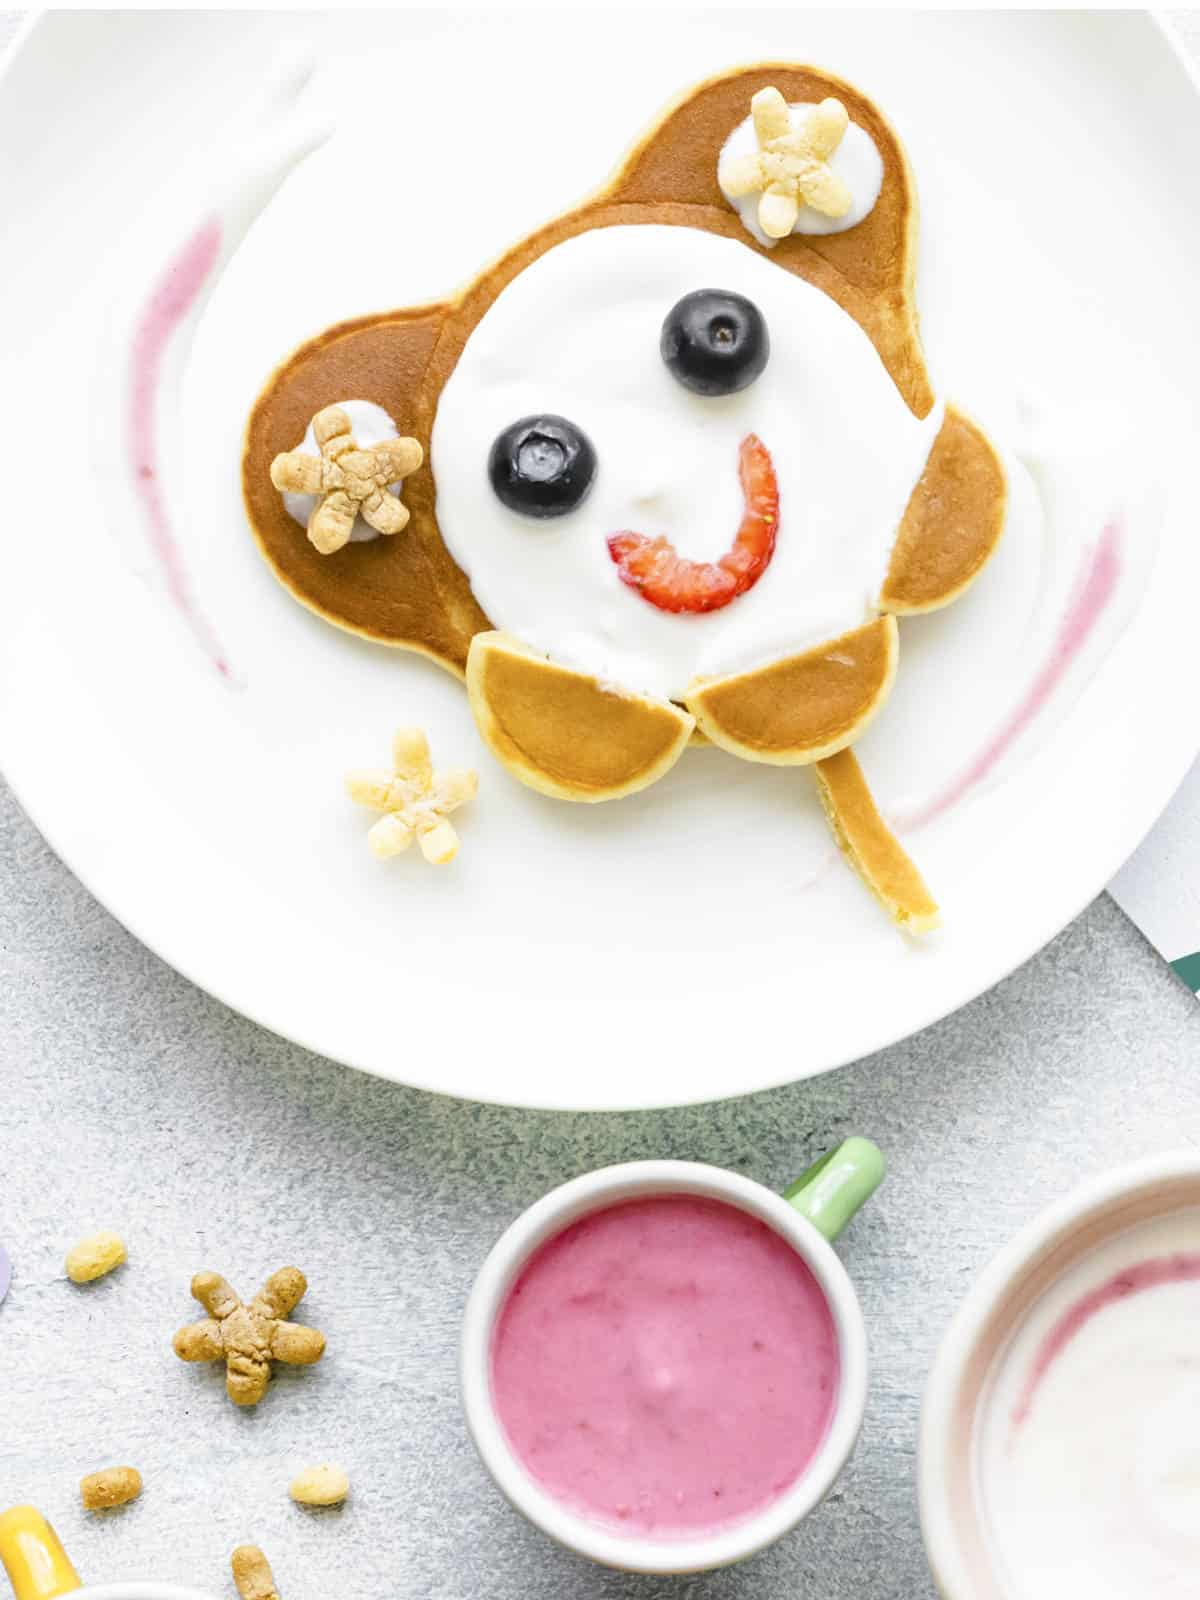 Cute breakfast, kids pancakes and chocolate cereal.